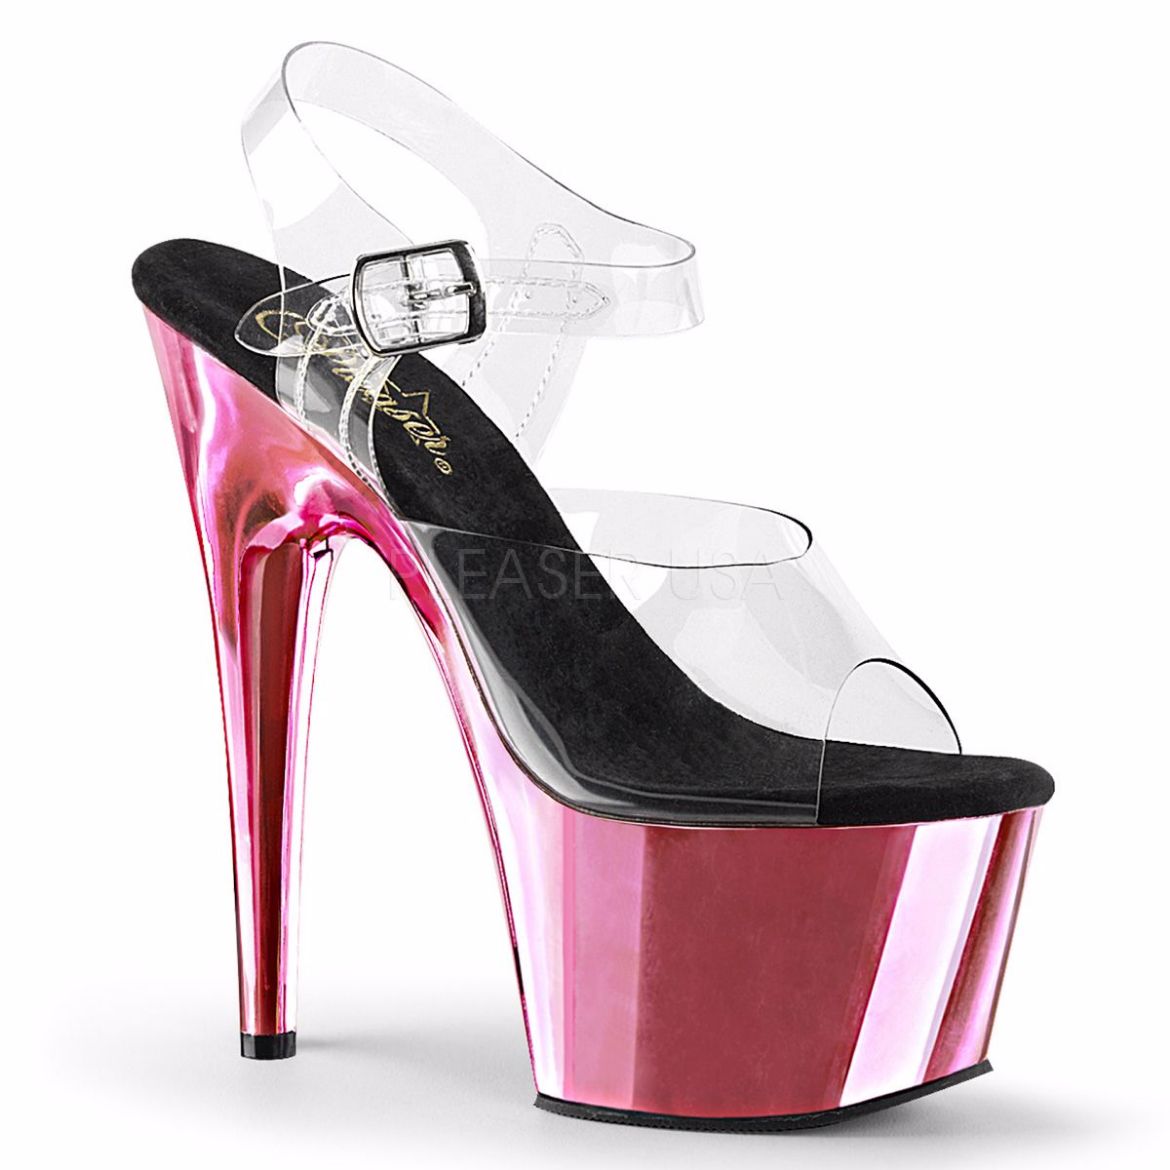 Product image of Pleaser Adore-708 Clear/Baby Pink Chrome, 7 inch (17.8 cm) Heel, 2 3/4 inch (7 cm) Platform Sandal Shoes